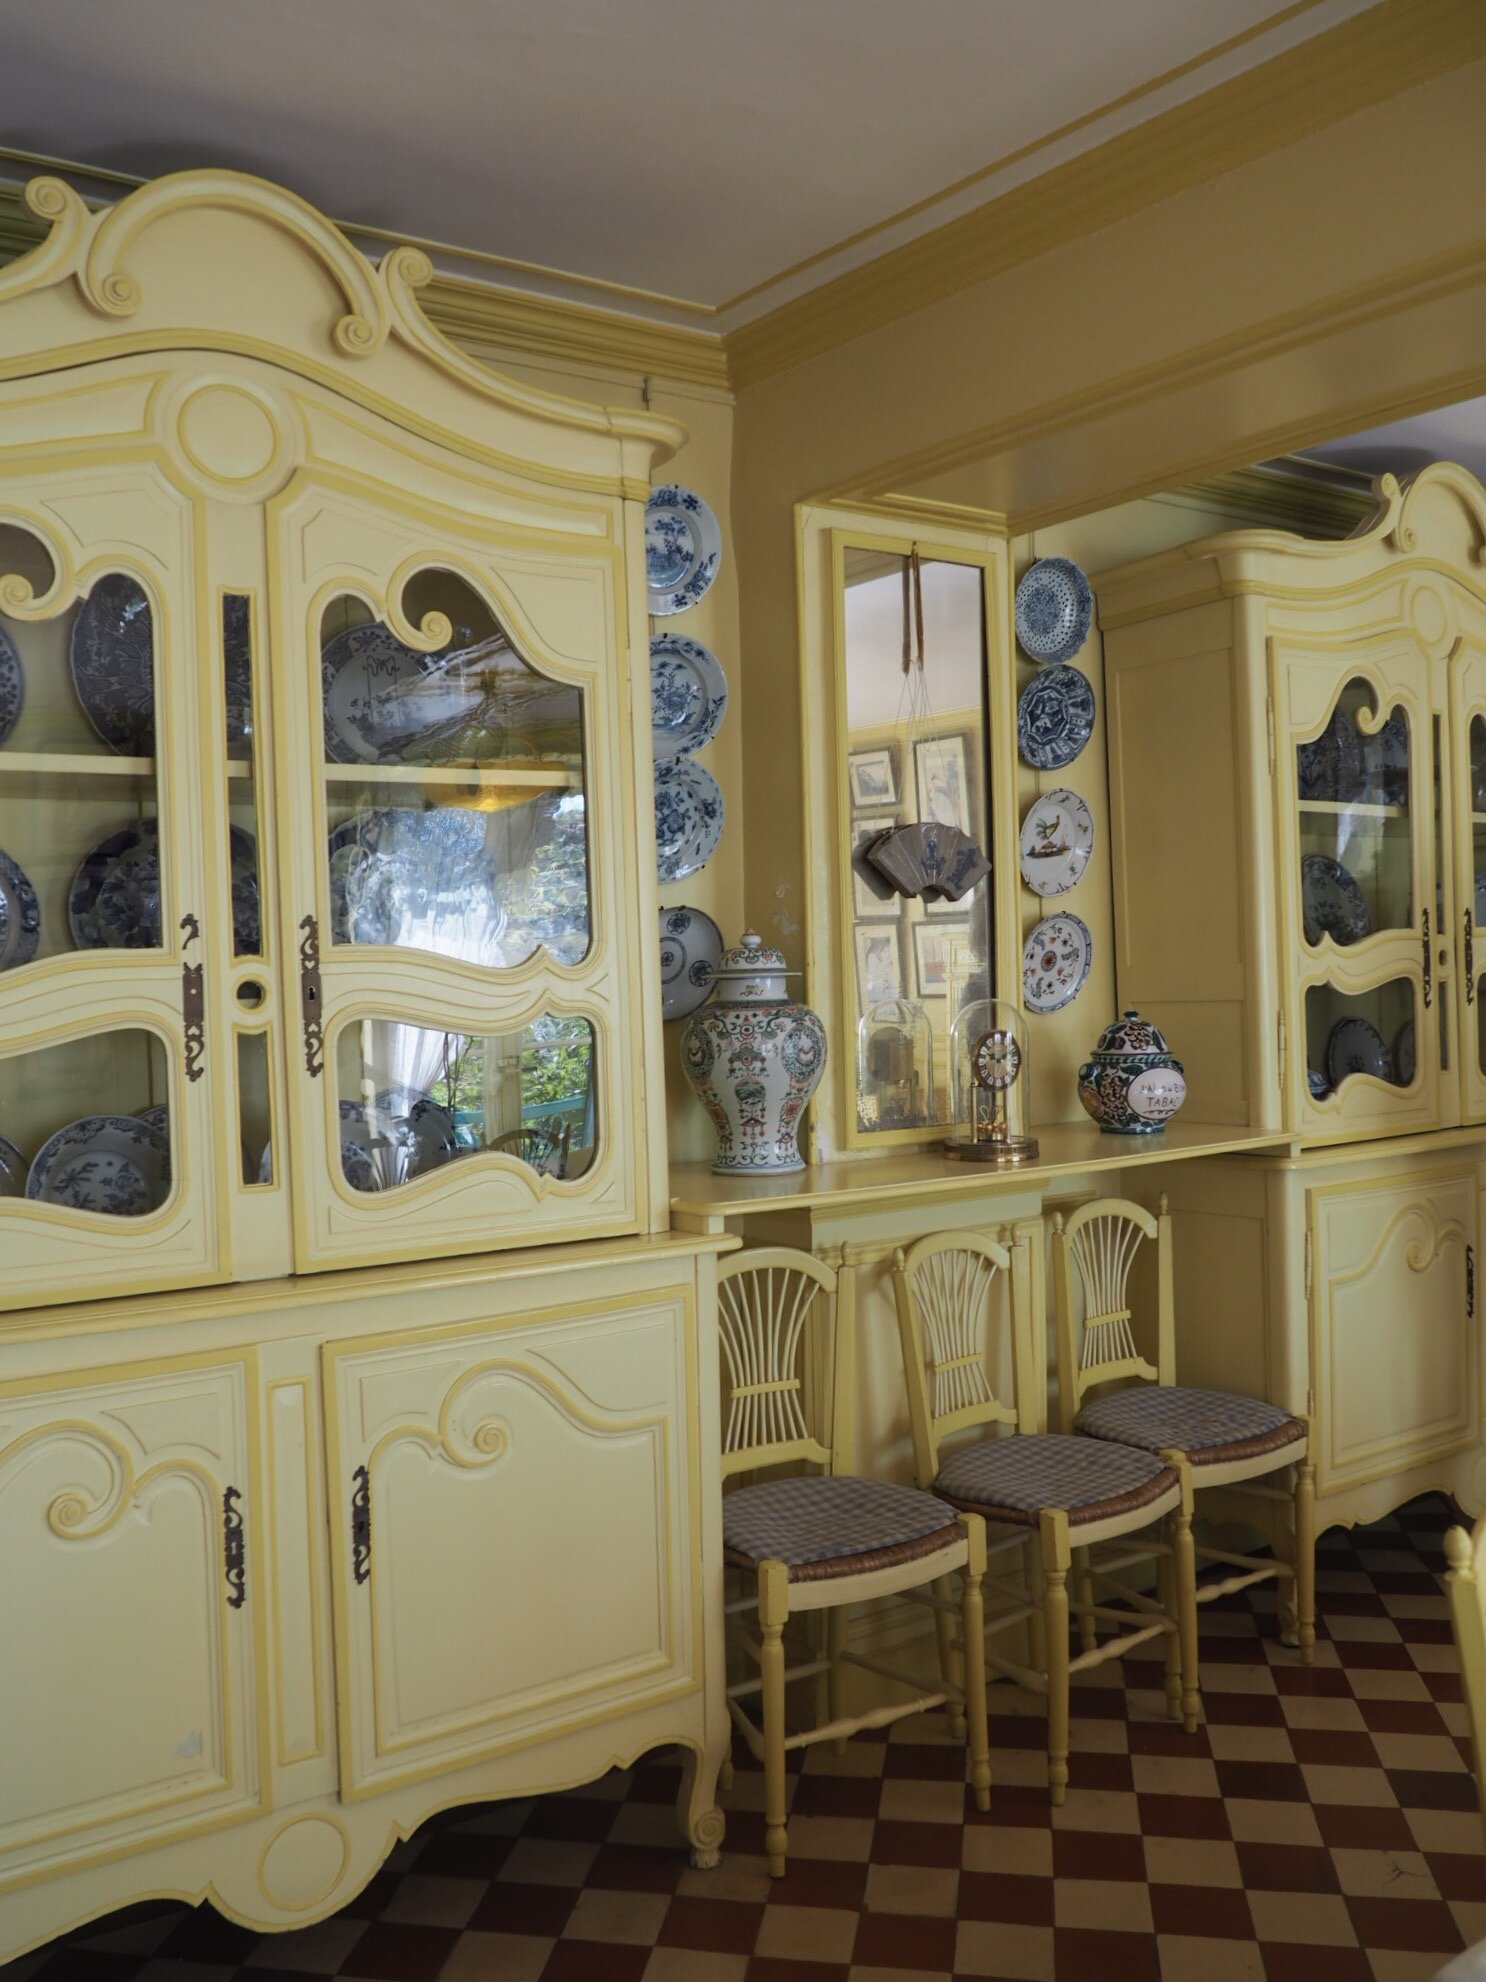 Blue-and-white pottery in Monet’s dining room